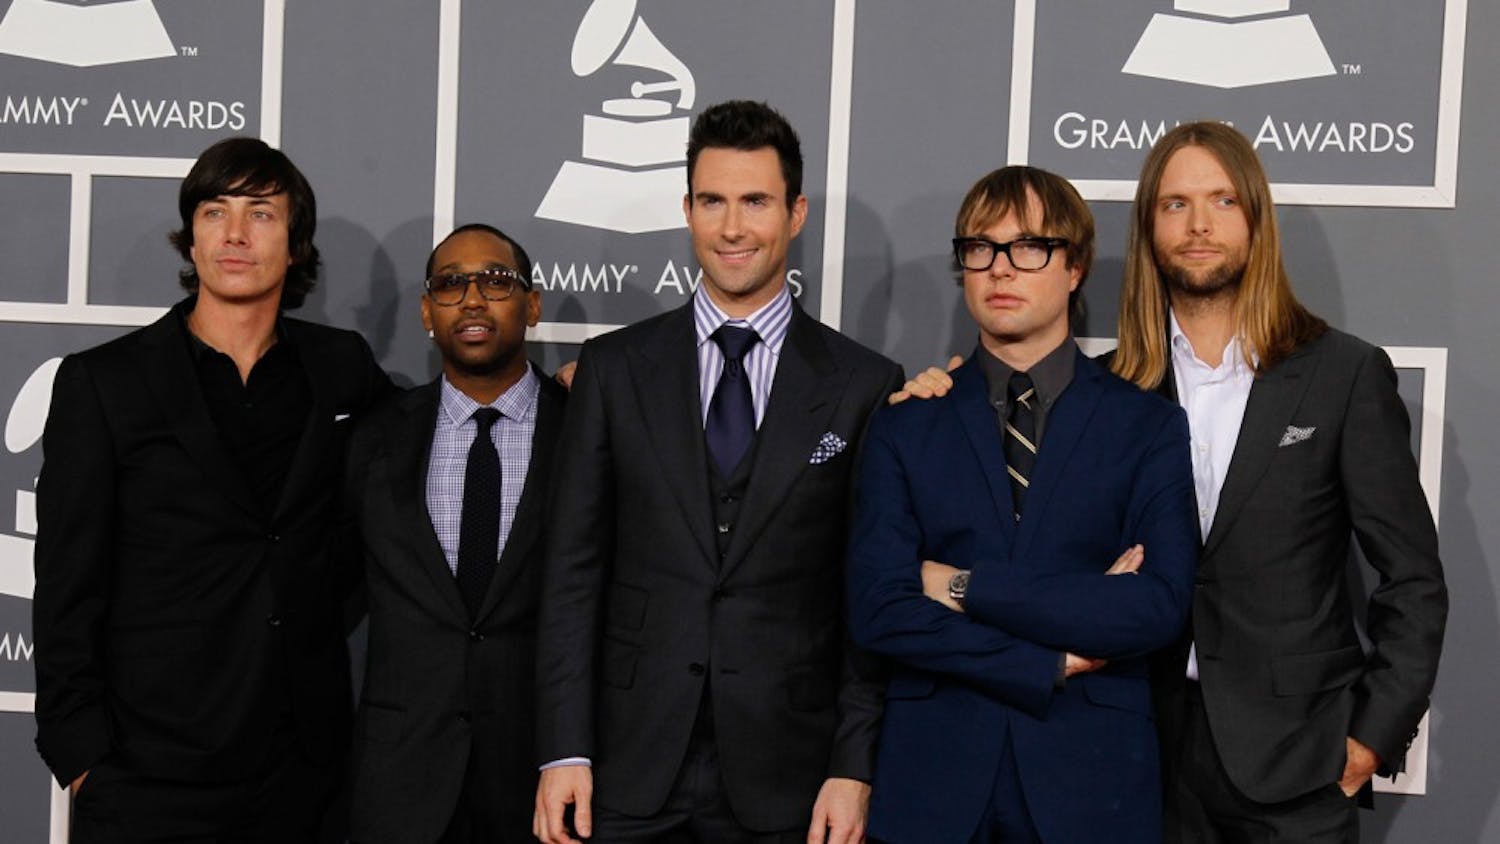 Maroon 5 at the 54th Annual Grammy Awards at the Staples Center in Los Angeles, California, on Sunday, February 12, 2012. (Kirk McKoy/Los Angeles Times/MCT)